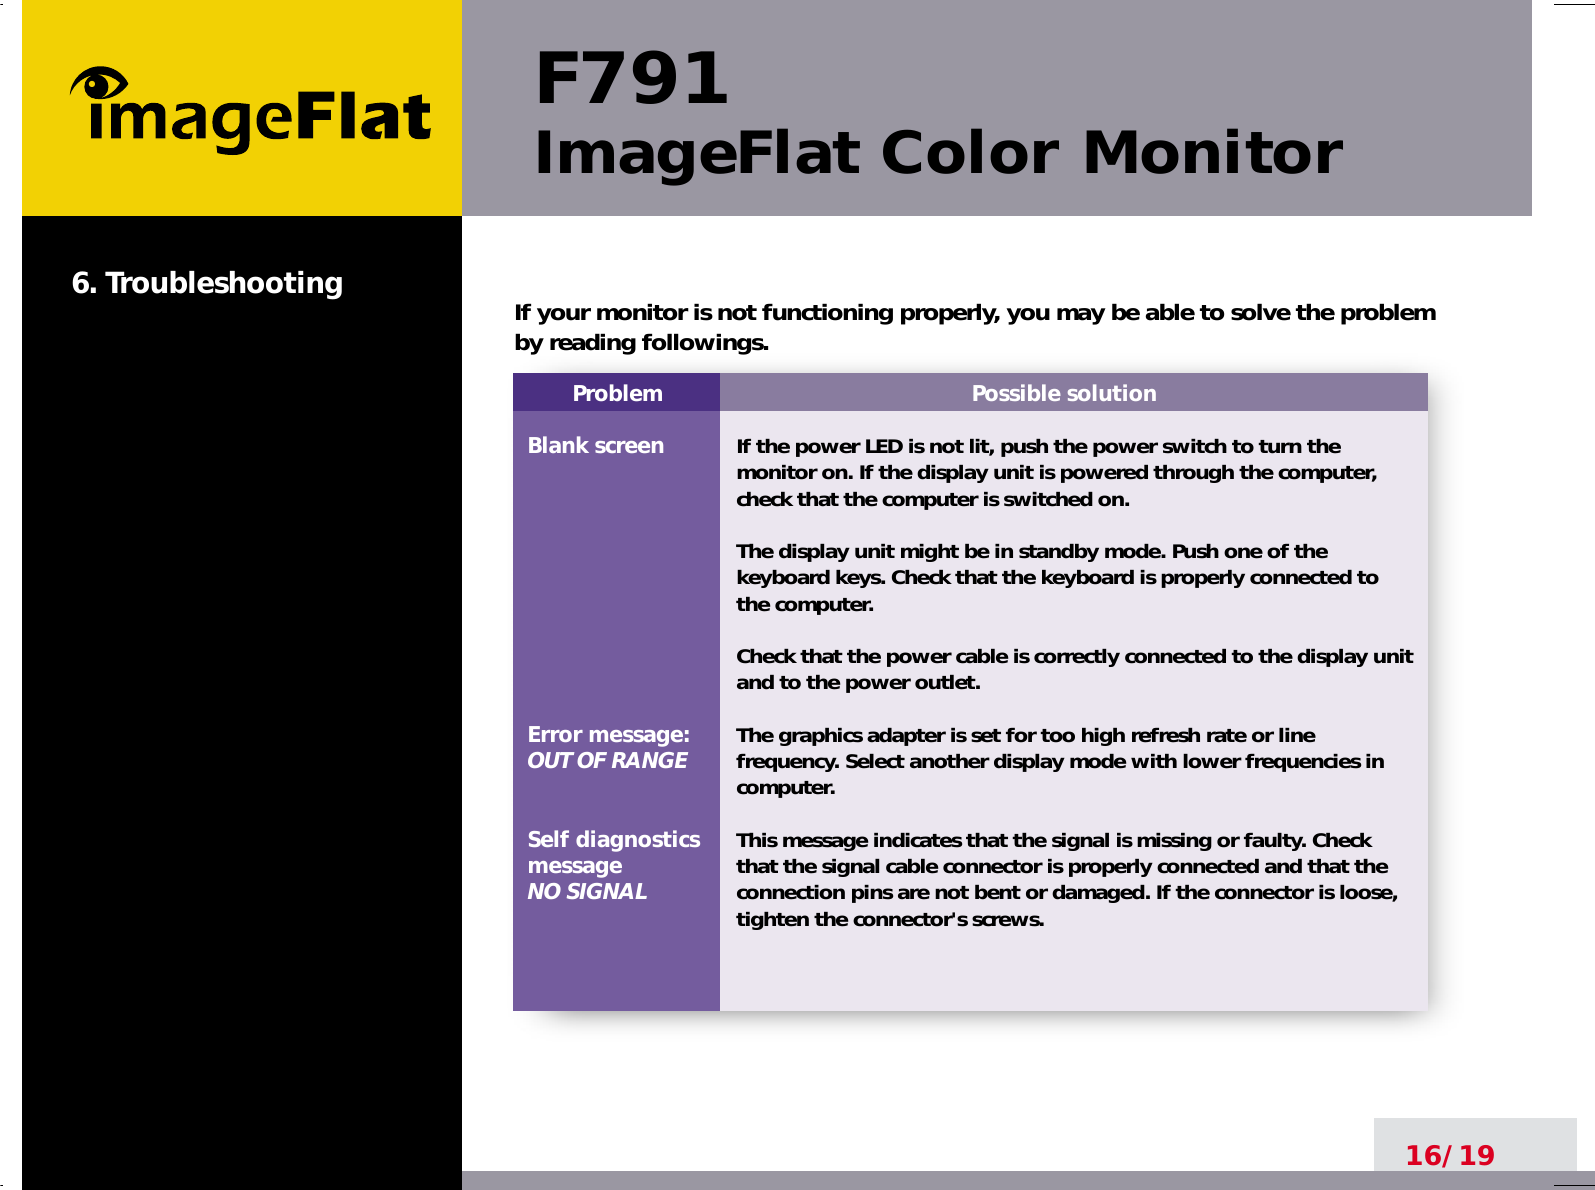 F791ImageFlat Color Monitor16/196. TroubleshootingProblemBlank screenError message:OUT OF RANGESelf diagnosticsmessageNO SIGNALPossible solutionIf the power LED is not lit, push the power switch to turn themonitor on. If the display unit is powered through the computer,check that the computer is switched on.The display unit might be in standby mode. Push one of thekeyboard keys. Check that the keyboard is properly connected tothe computer.Check that the power cable is correctly connected to the display unitand to the power outlet. The graphics adapter is set for too high refresh rate or linefrequency. Select another display mode with lower frequencies incomputer.This message indicates that the signal is missing or faulty. Checkthat the signal cable connector is properly connected and that theconnection pins are not bent or damaged. If the connector is loose,tighten the connector&apos;s screws.If your monitor is not functioning properly, you may be able to solve the problemby reading followings.